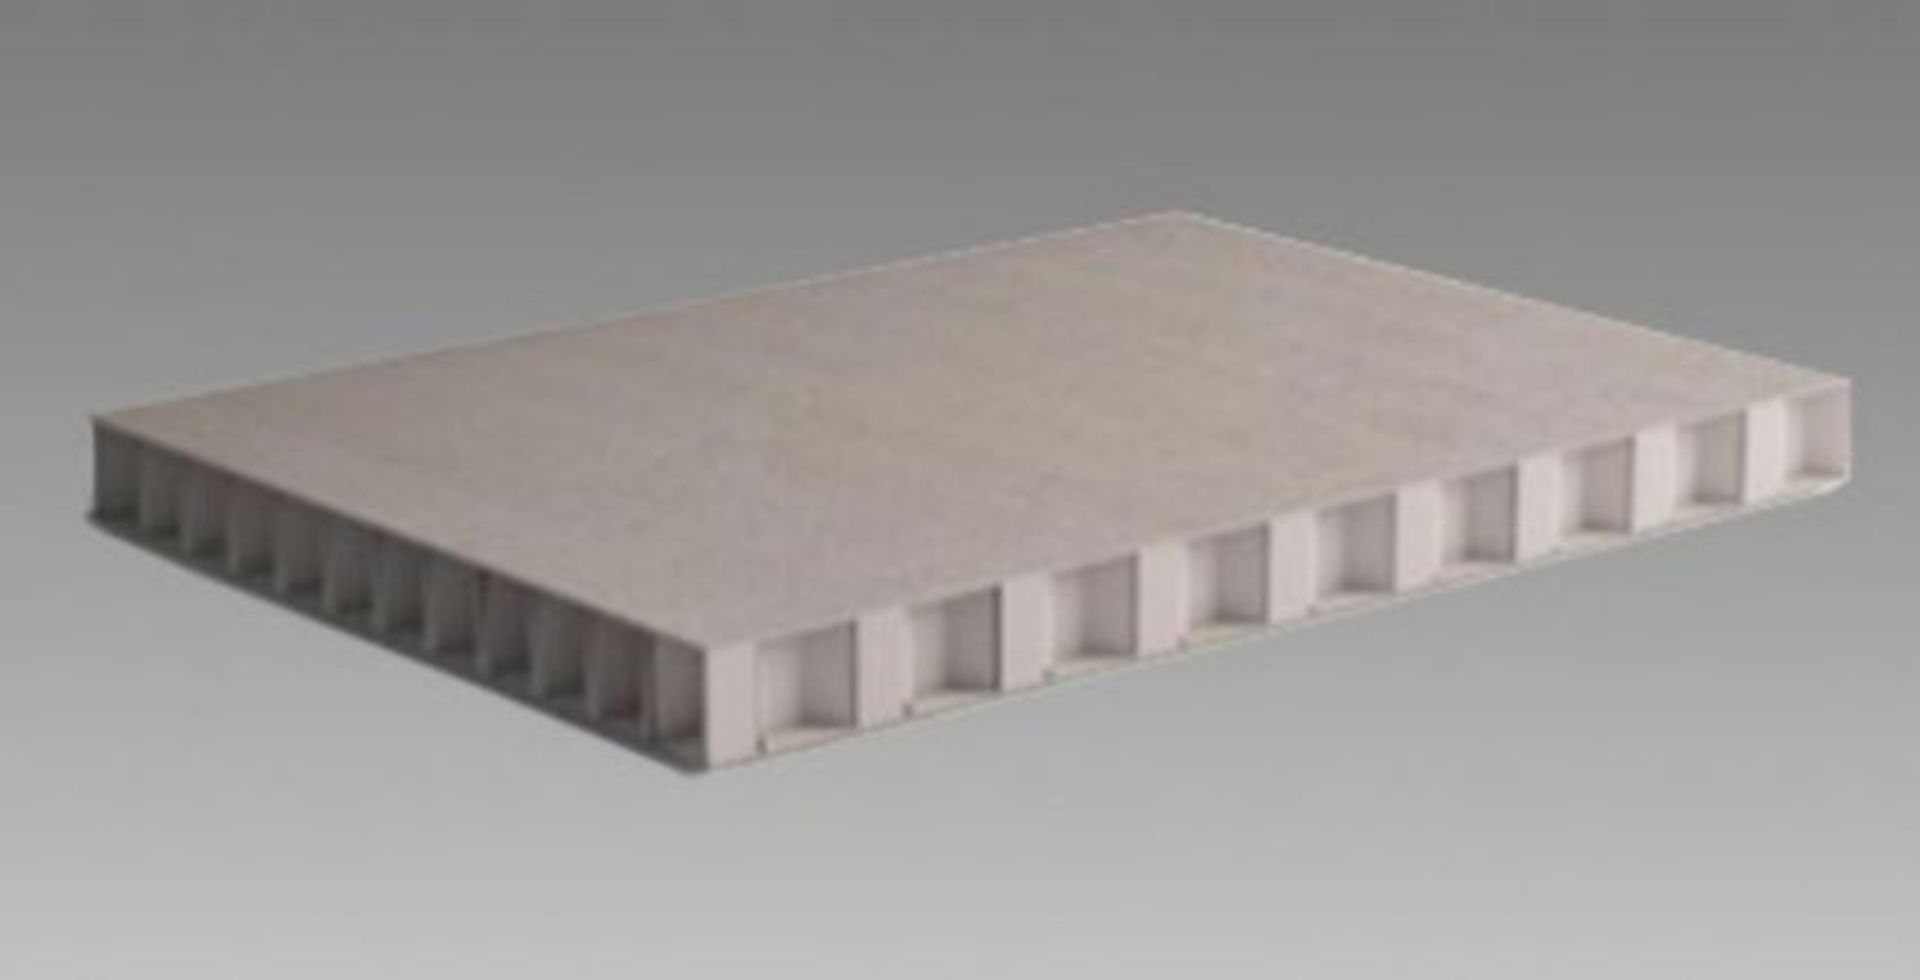 12 x ThermHex Thermoplastic Honeycomb Core Panels - Size 693 x 1210 x 20mm - New Stock - Lightweight